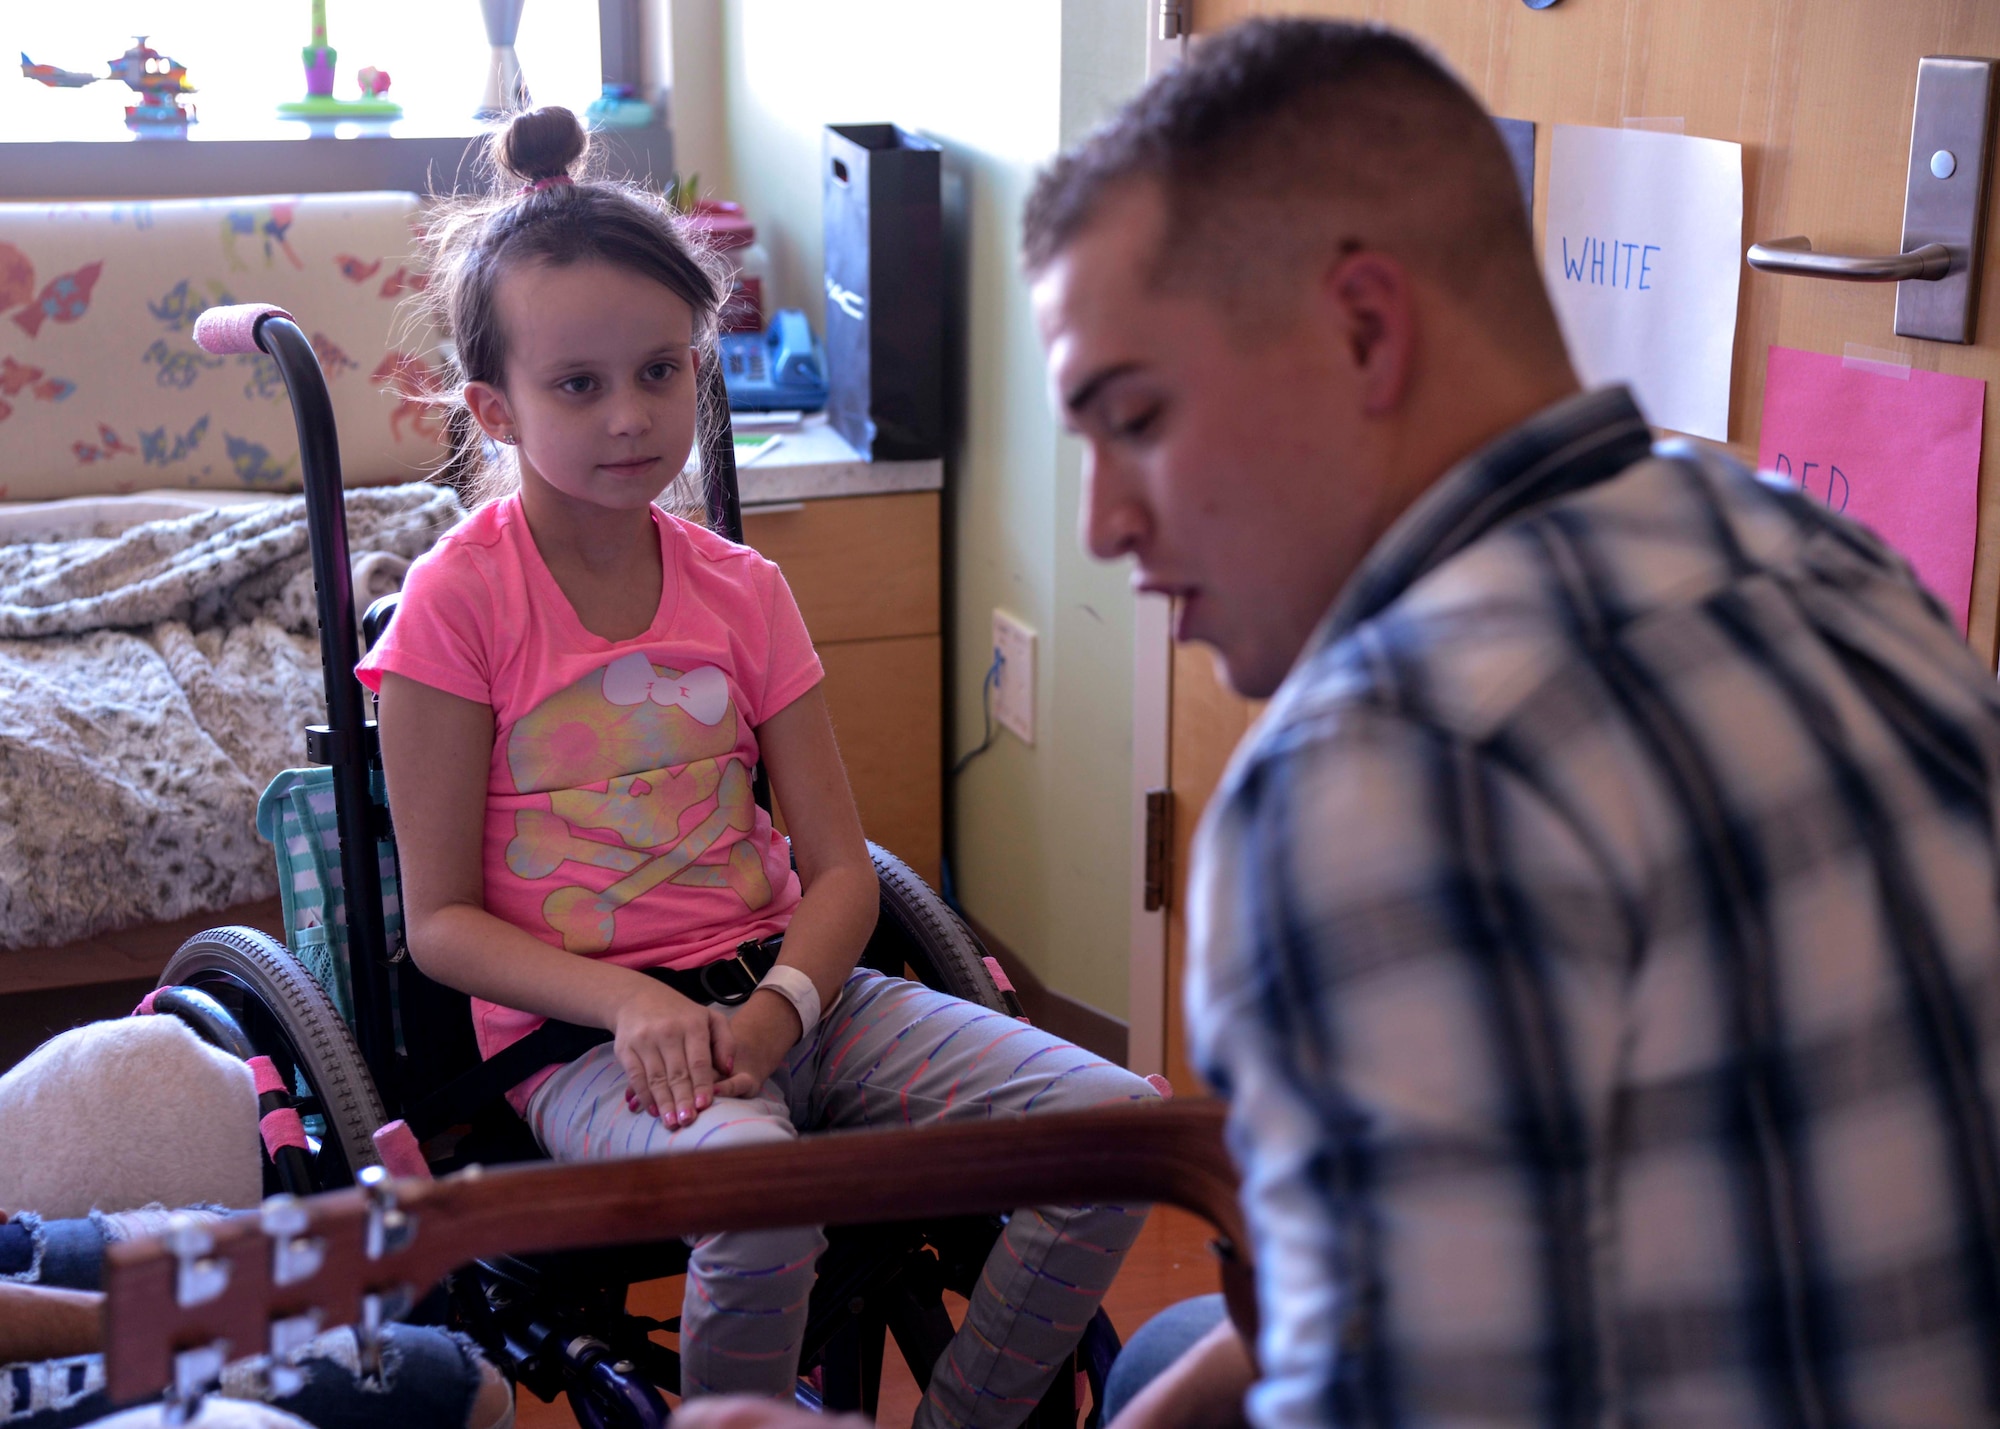 Kimmy Duran, patient of the Children's Hospital Colorado in Aurora, Colorado, watches as Airman 1st Class Dylan Westmoreland, 790th Quick Response Force, plays music for her, Jan. 6, 2016. Duran is one of several children Westmoreland was able to play for after his broadcast throughout the whole hospital. (U.S. Air Force photo by Airman 1st Class Malcolm Mayfield)